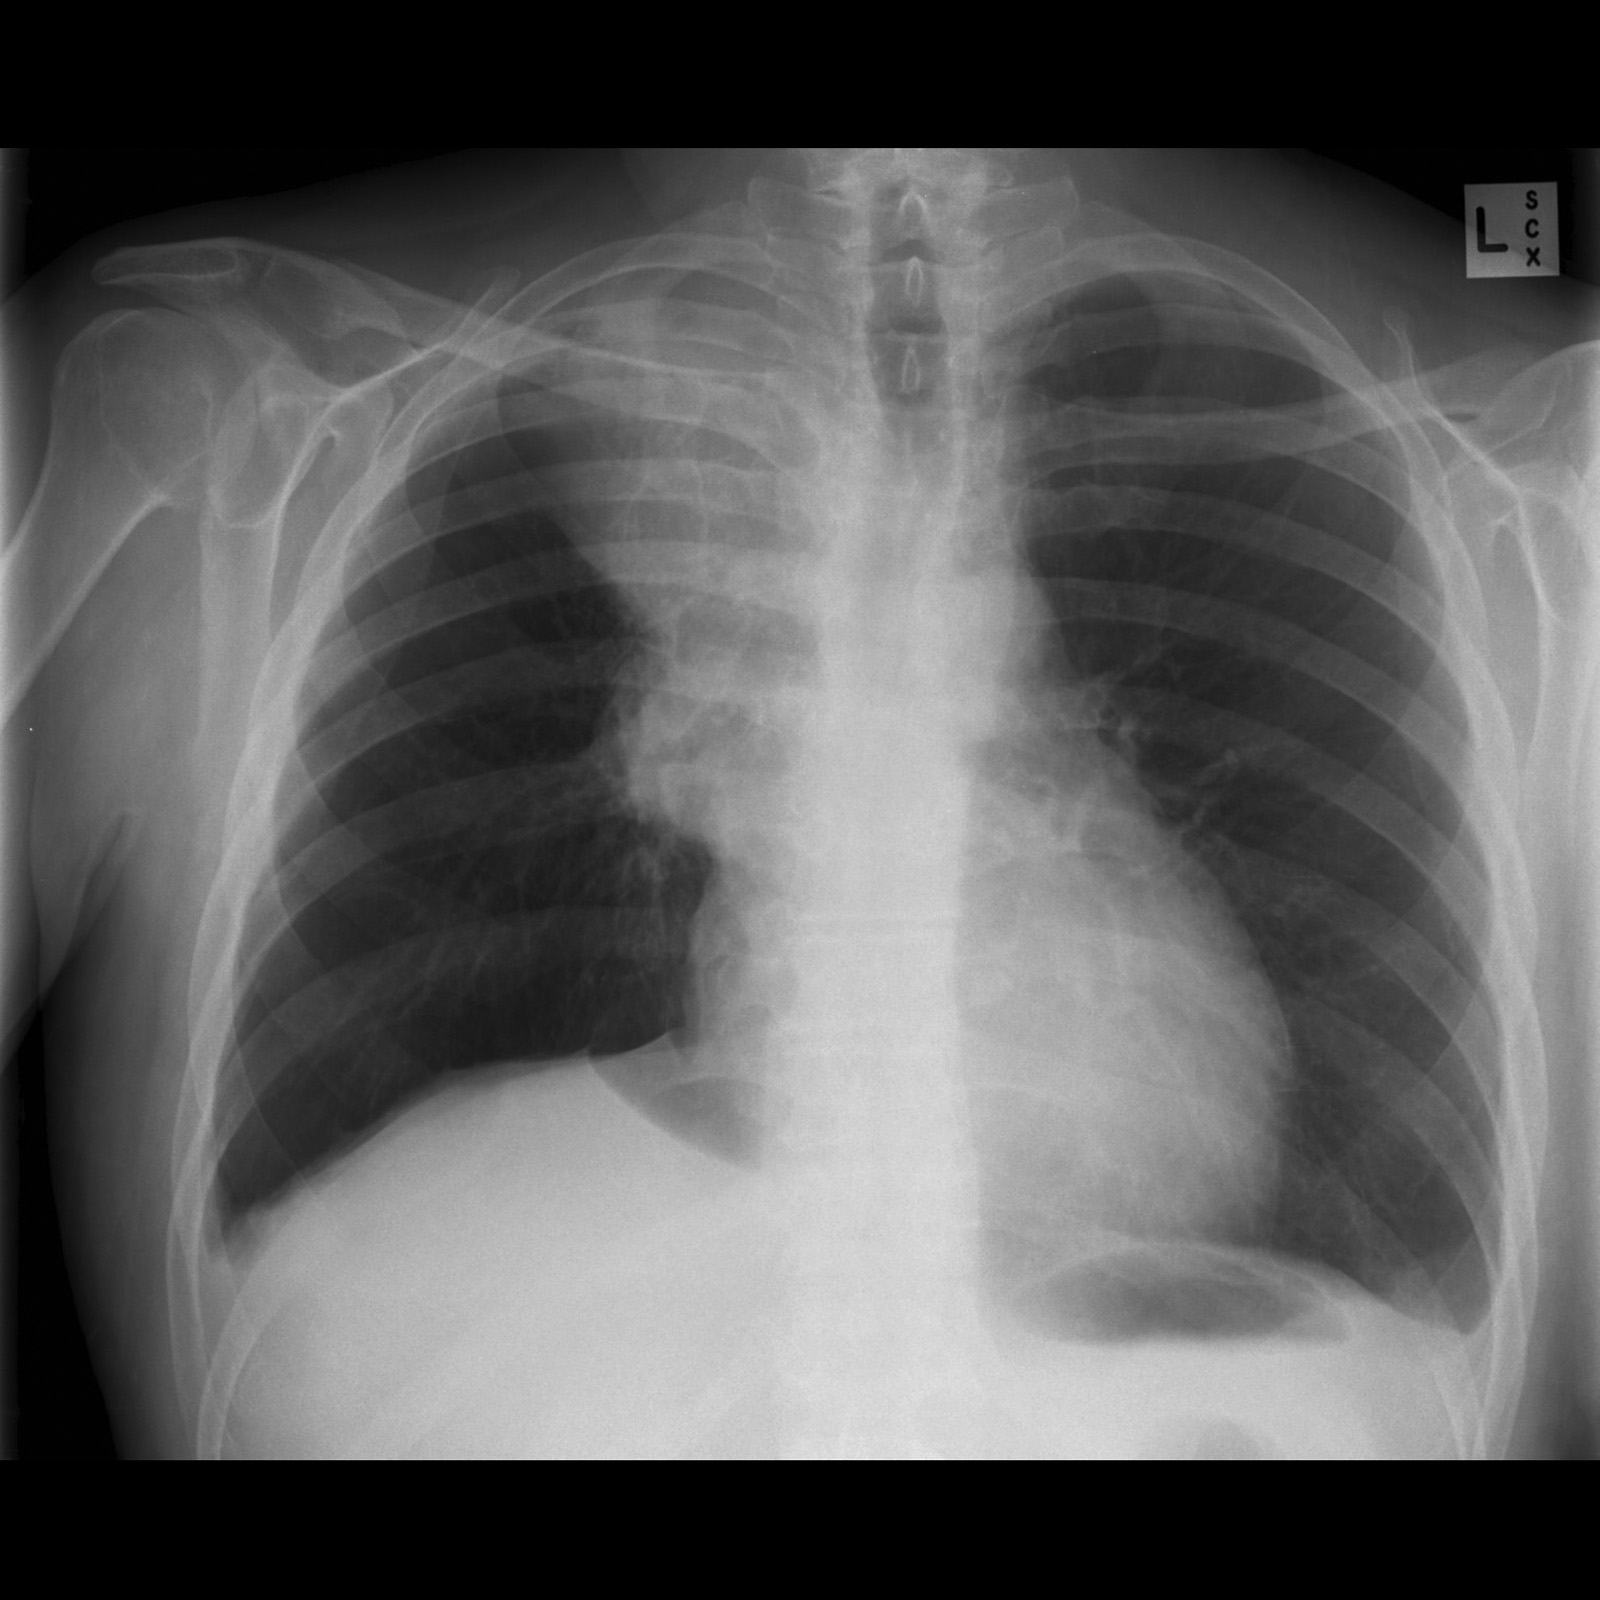 File:Small-cell-lung-cancer-right-upper-lobe-collapse.jpg